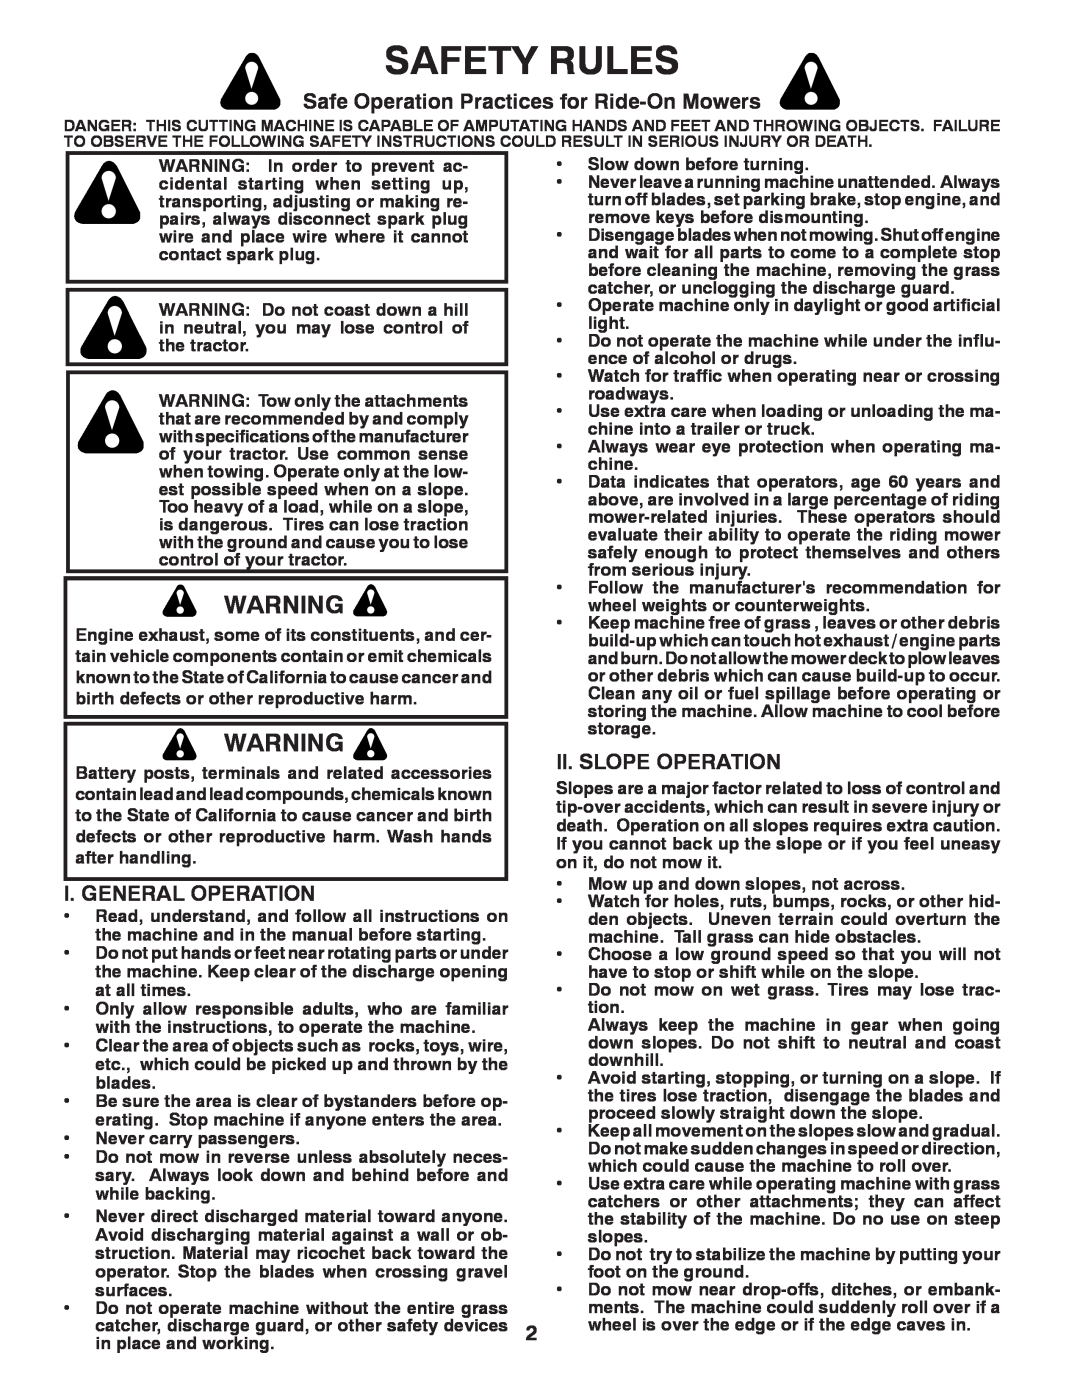 Poulan 9604200602 Safety Rules, Safe Operation Practices for Ride-On Mowers, I. General Operation, Ii. Slope Operation 